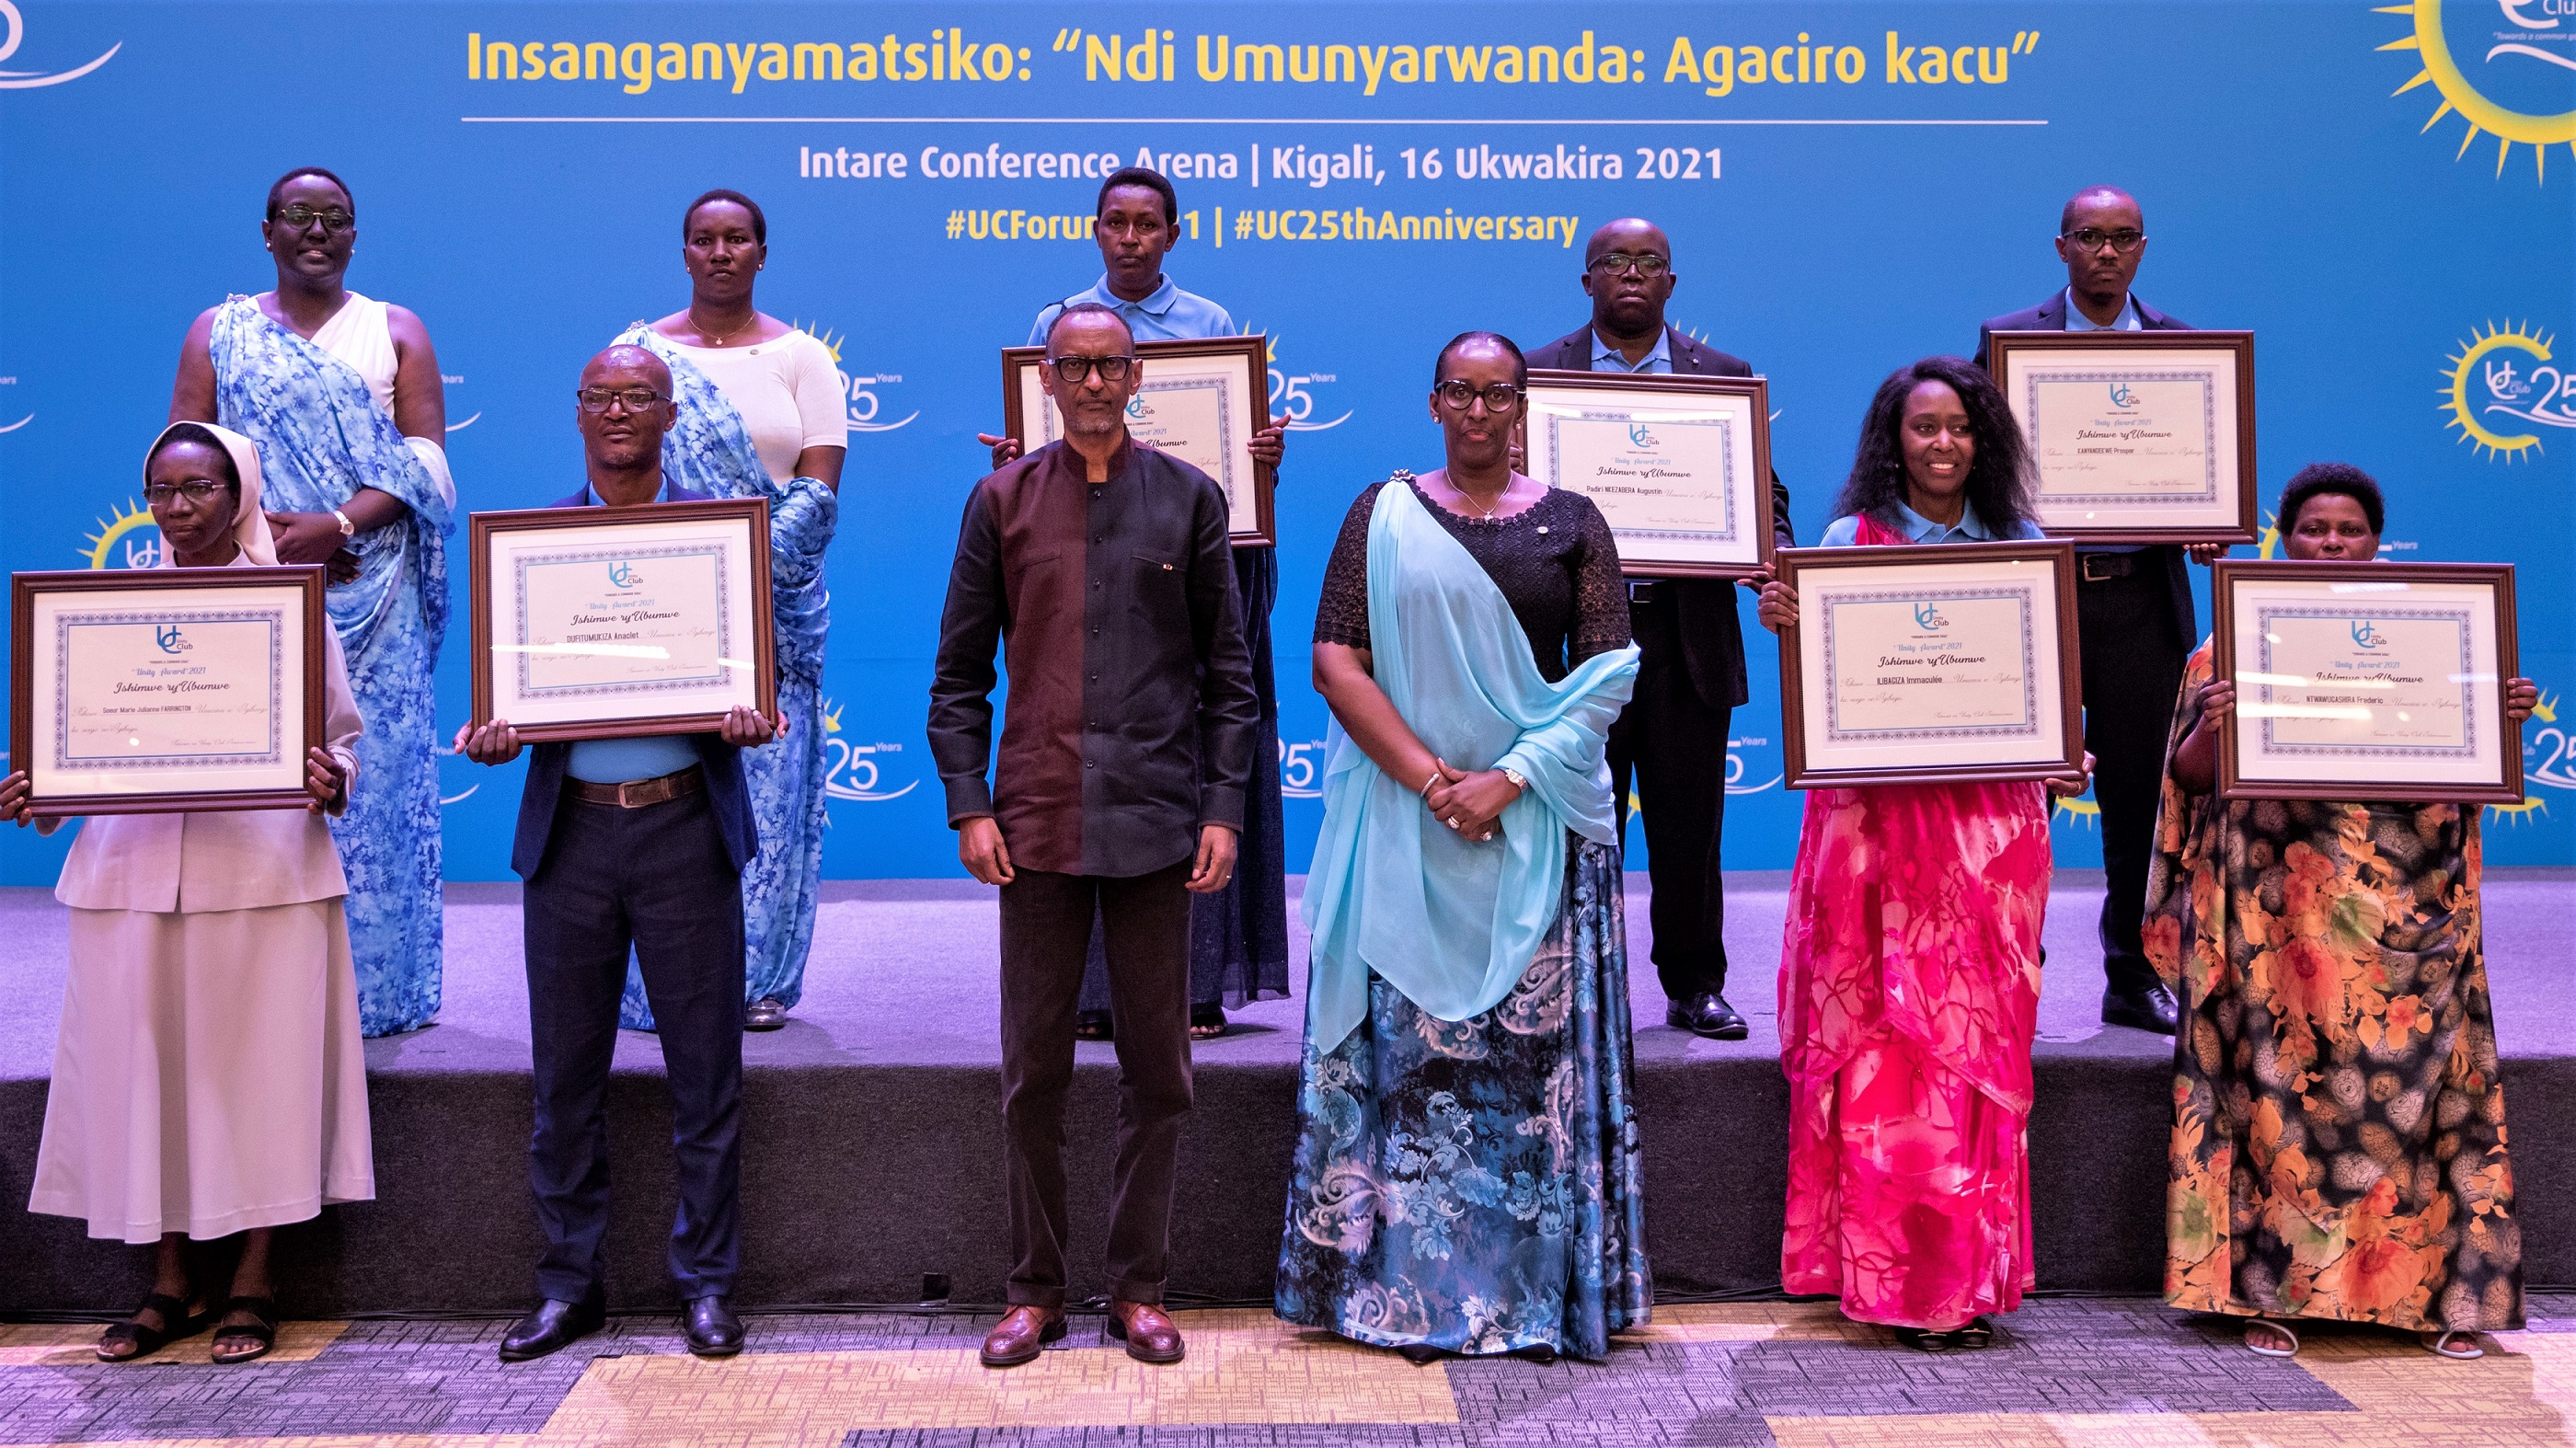 President Paul Kagame and the First Lady, Jeannette Kagame, attended the 25th anniversary celebration of Unity Club Intwararumuri on Saturday evening at Intare Arena, in Kigali. Seven champions of Unity were recognised during the ceremony. 